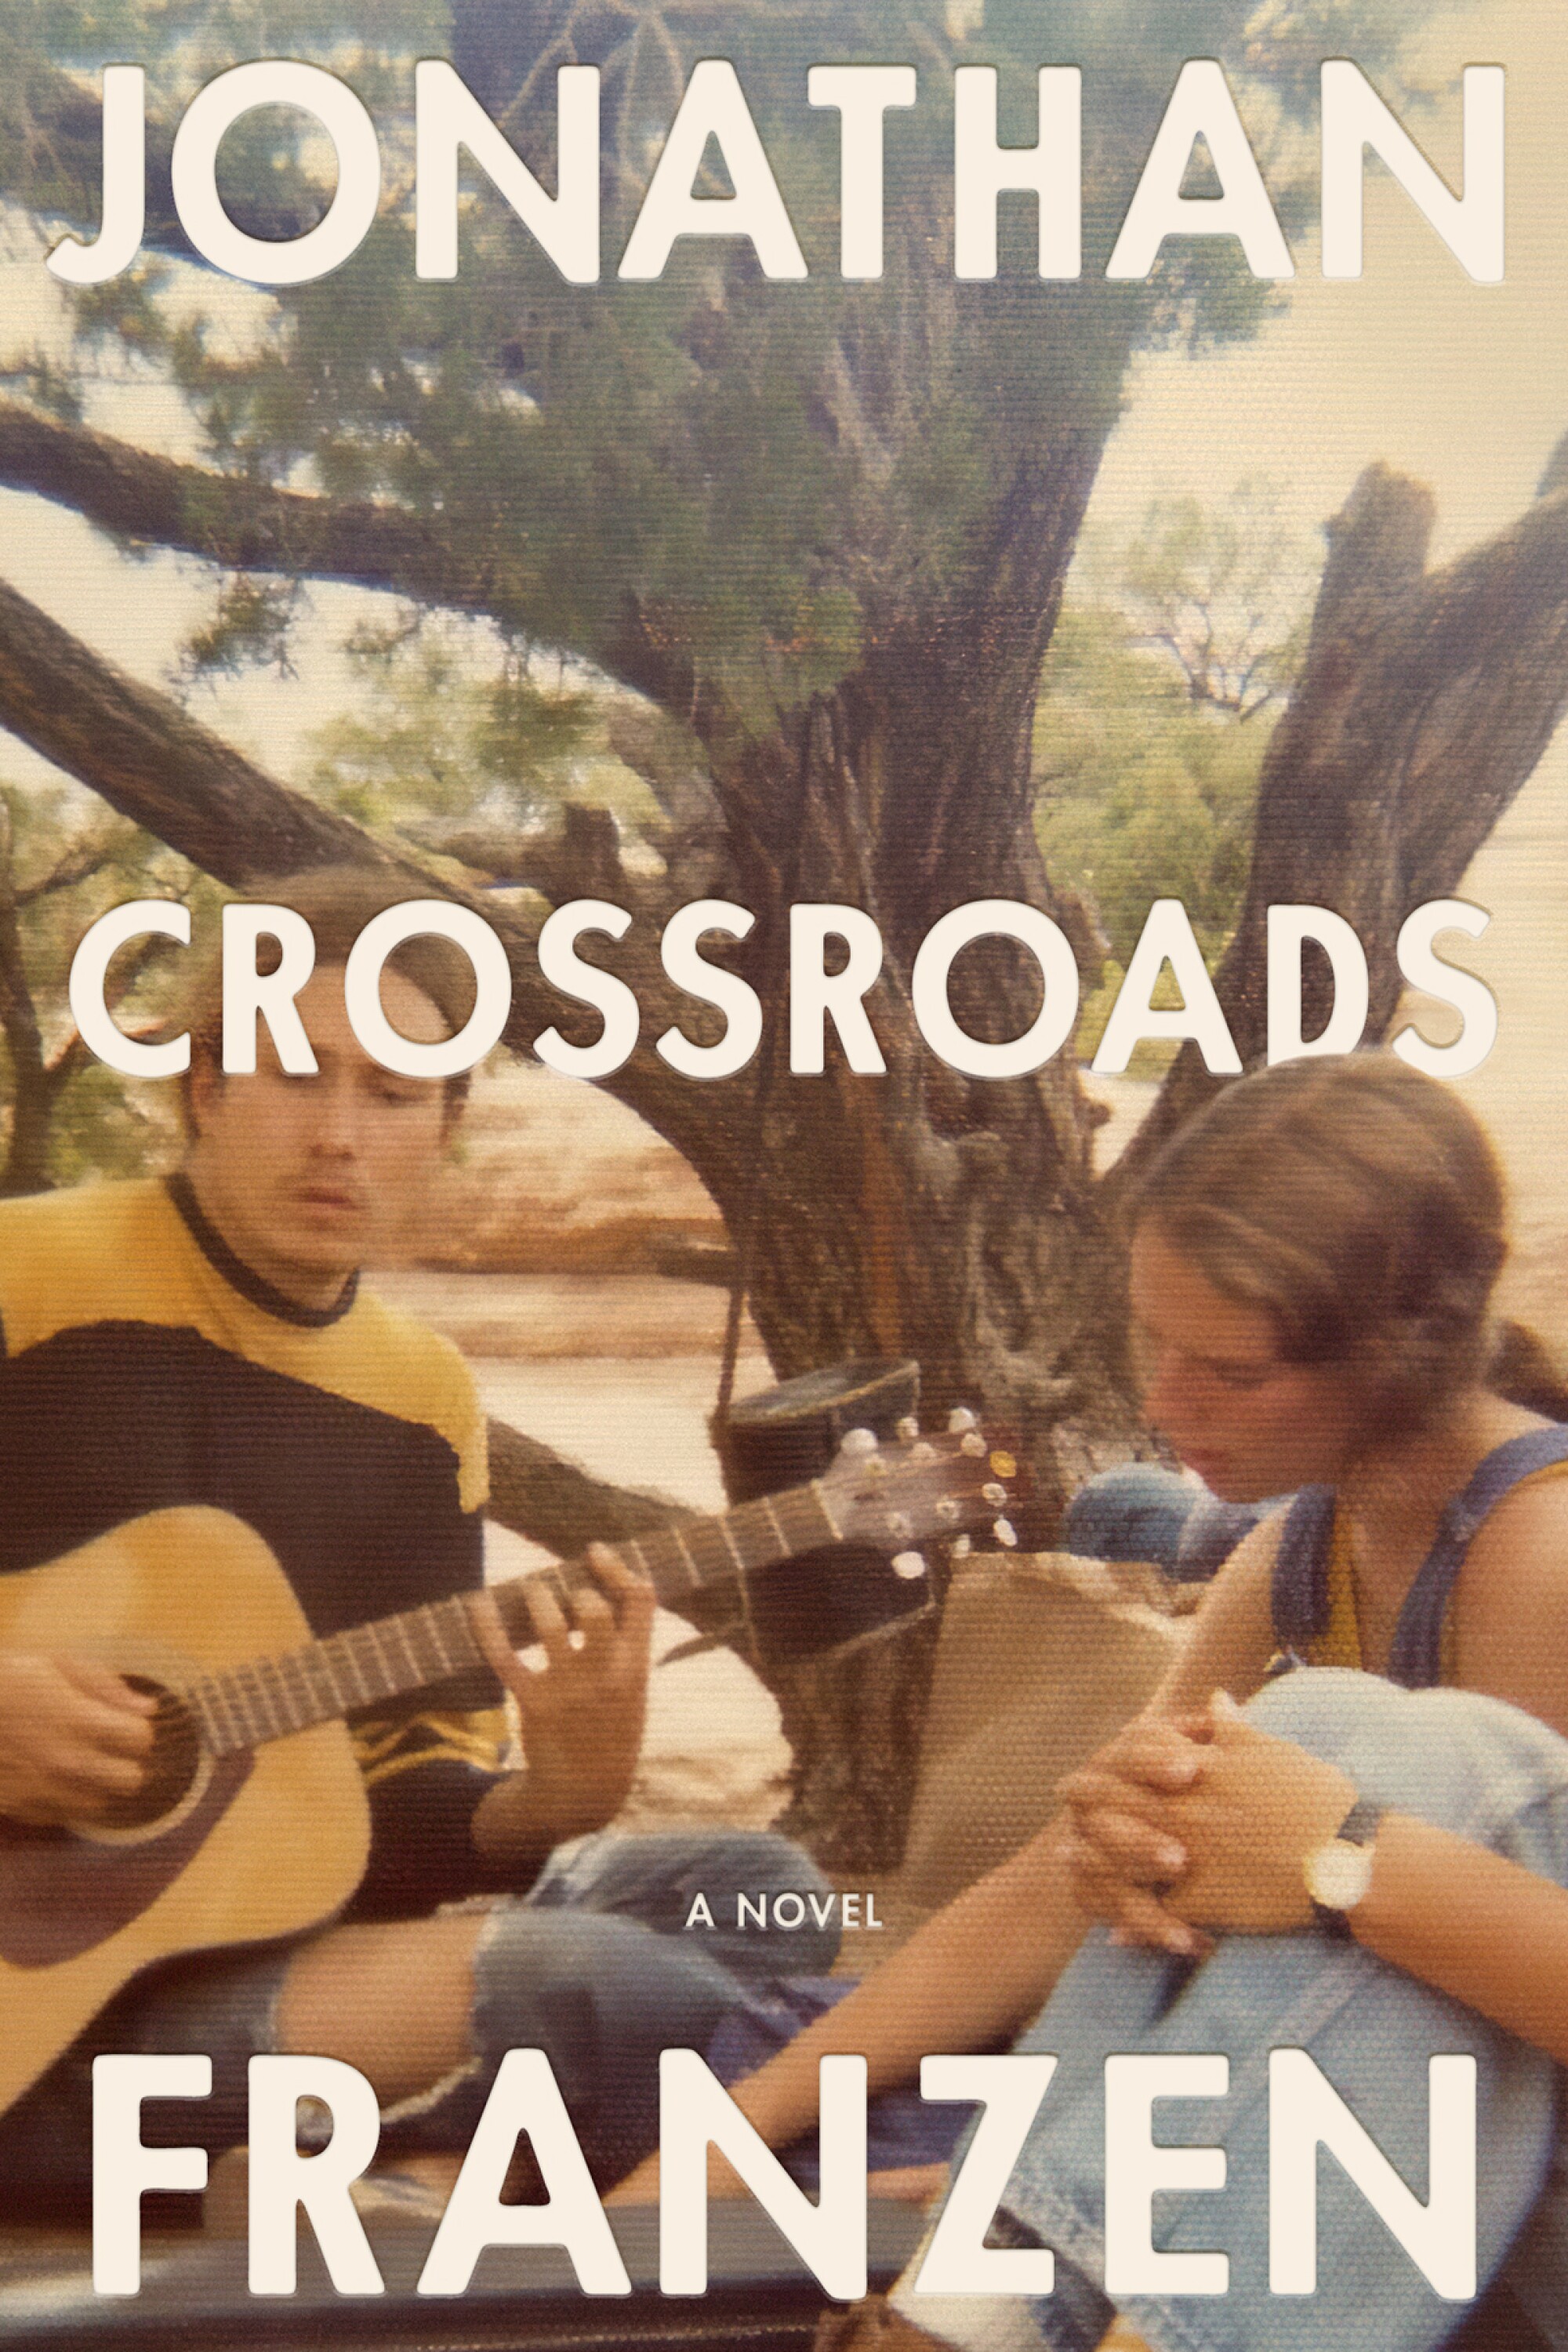 A man playing a guitar and a woman are sitting outside on the blanket of "Crossroads," by Jonathan Franzen.